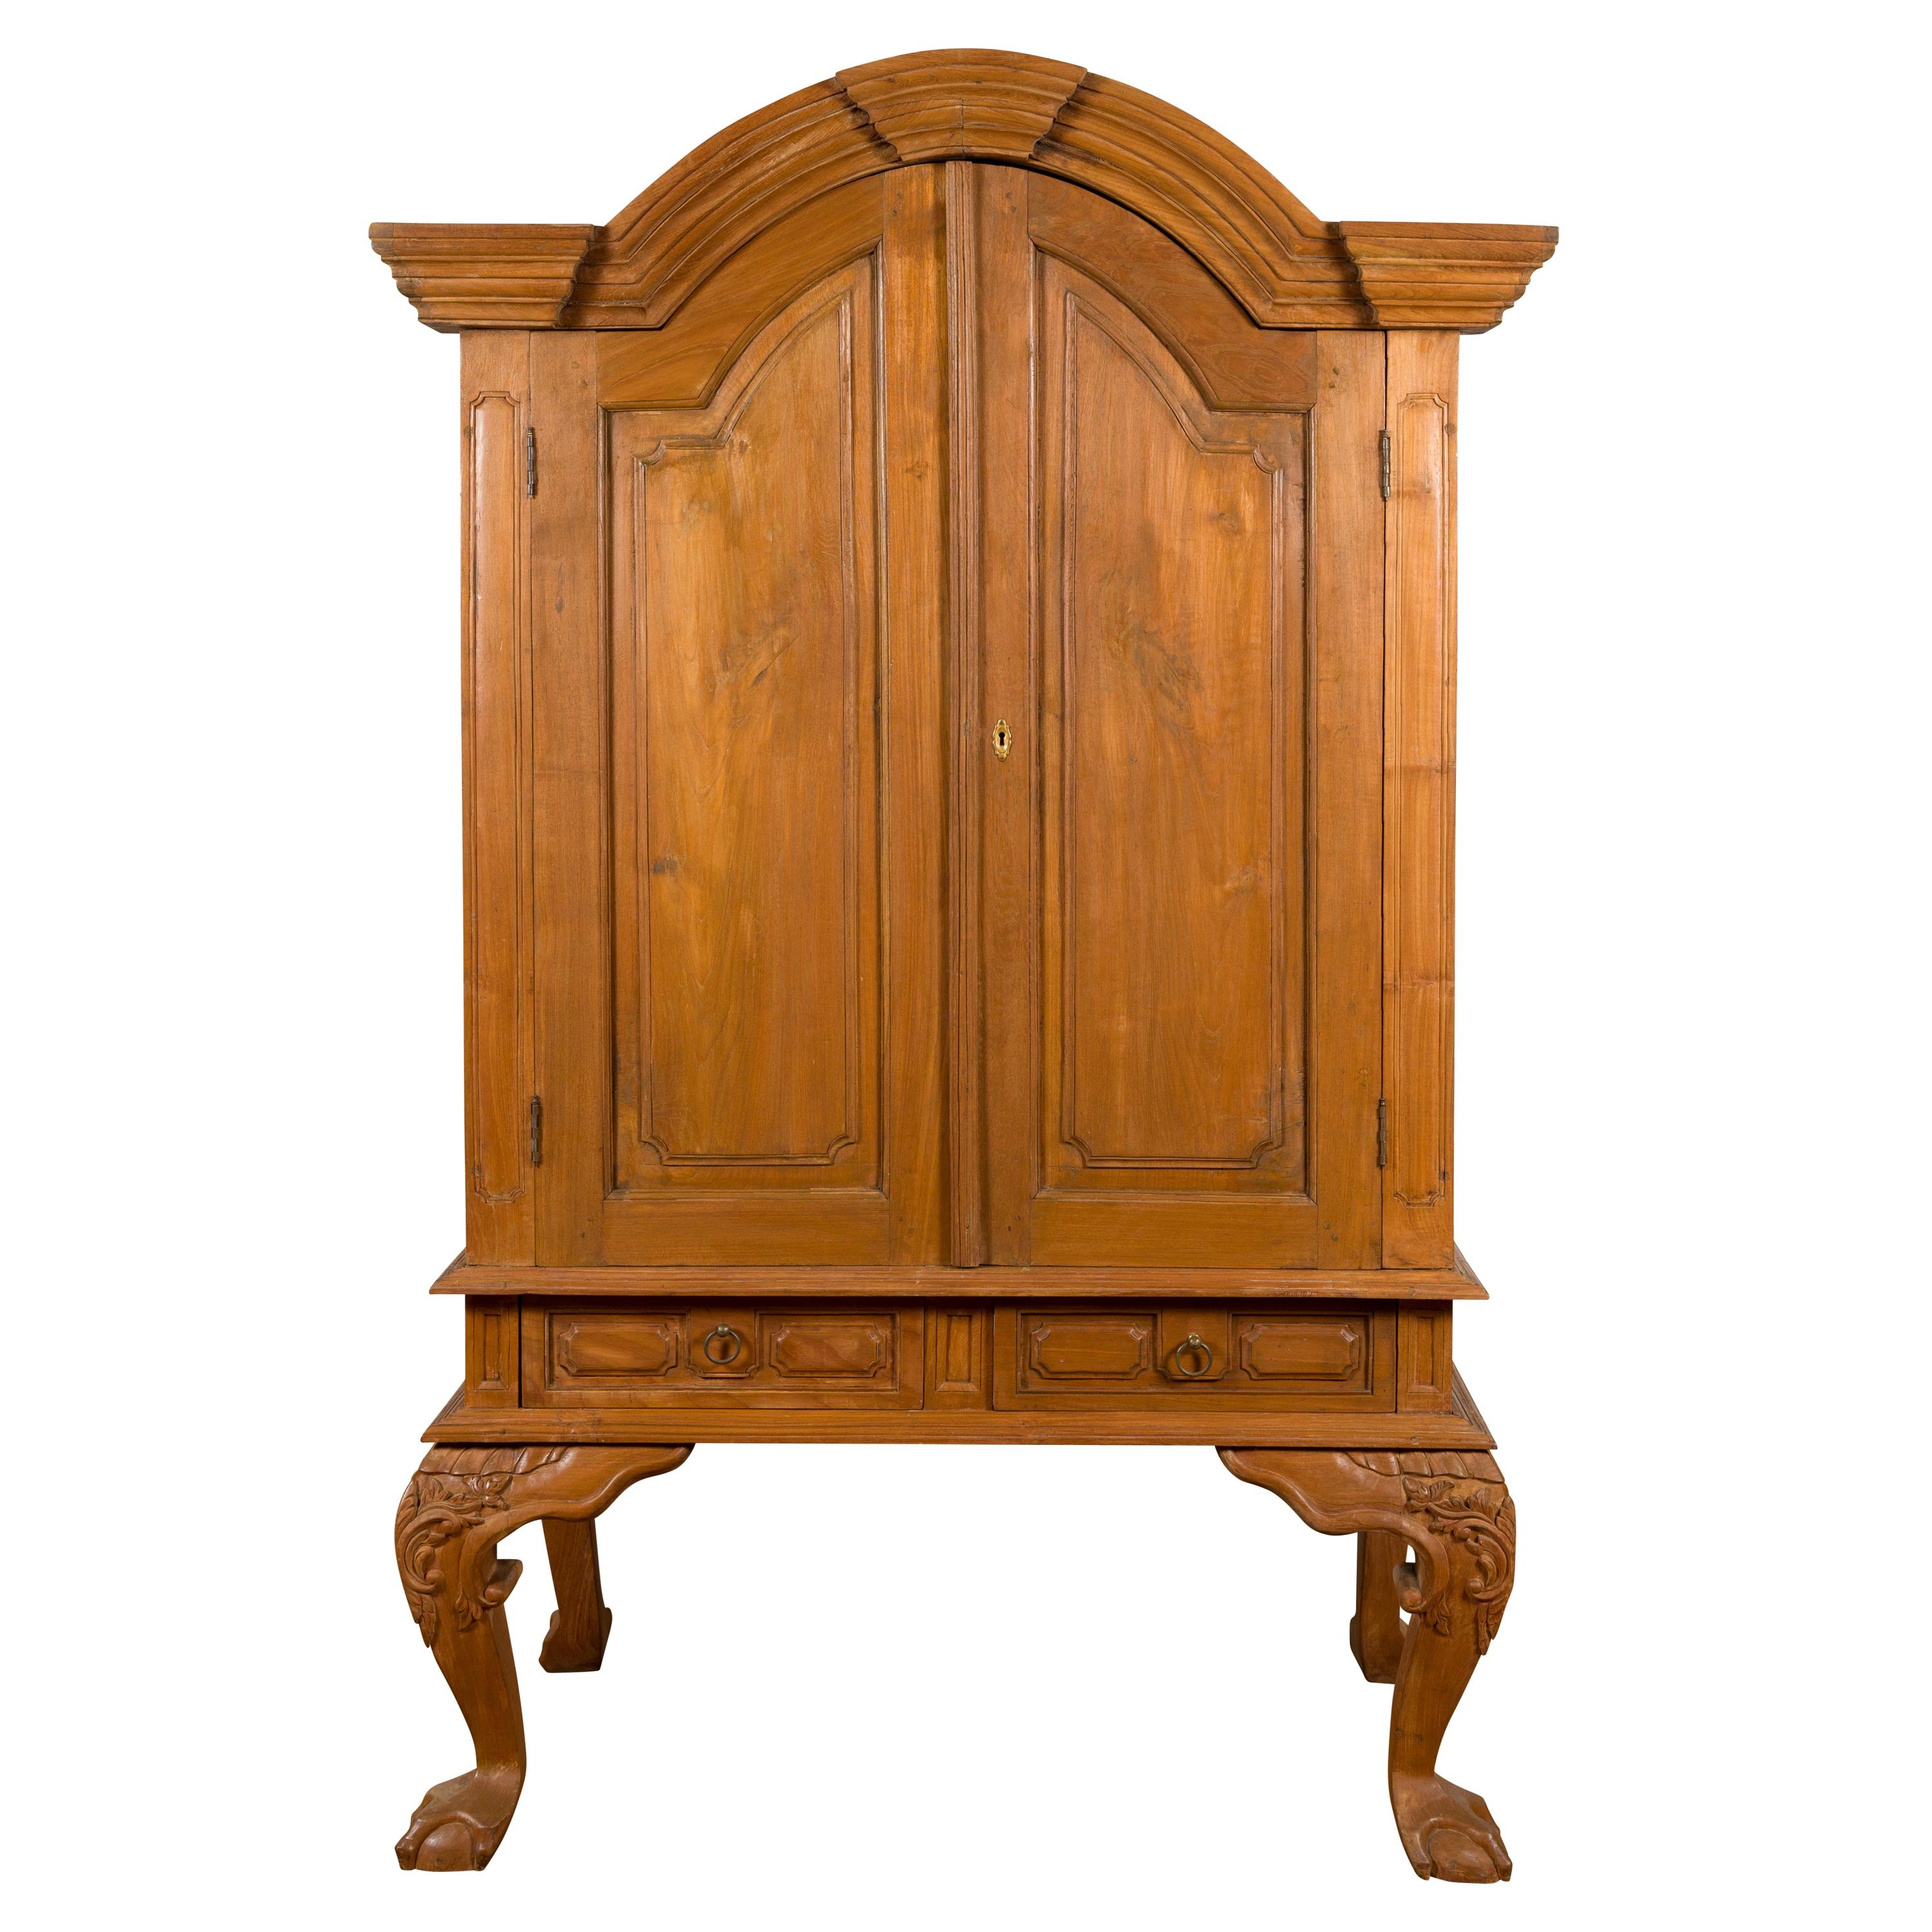 Dutch Colonial Late 19th Century Teak Cabinet with Bonnet Top and Cabriole Legs